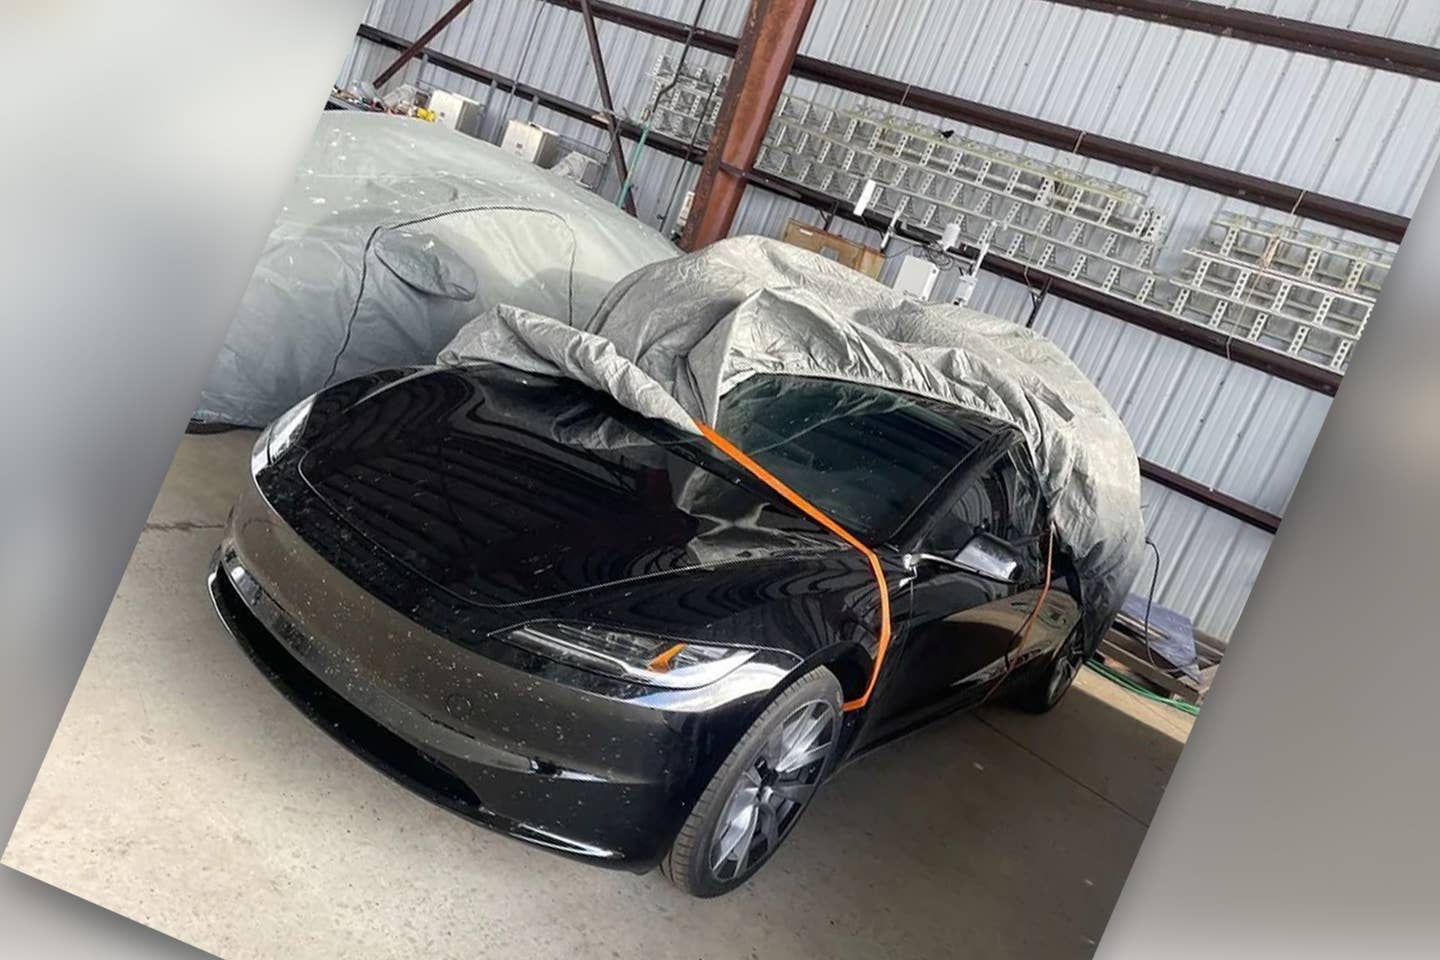 A supposed refreshed Tesla Model 3 was spied uncovered back in April.